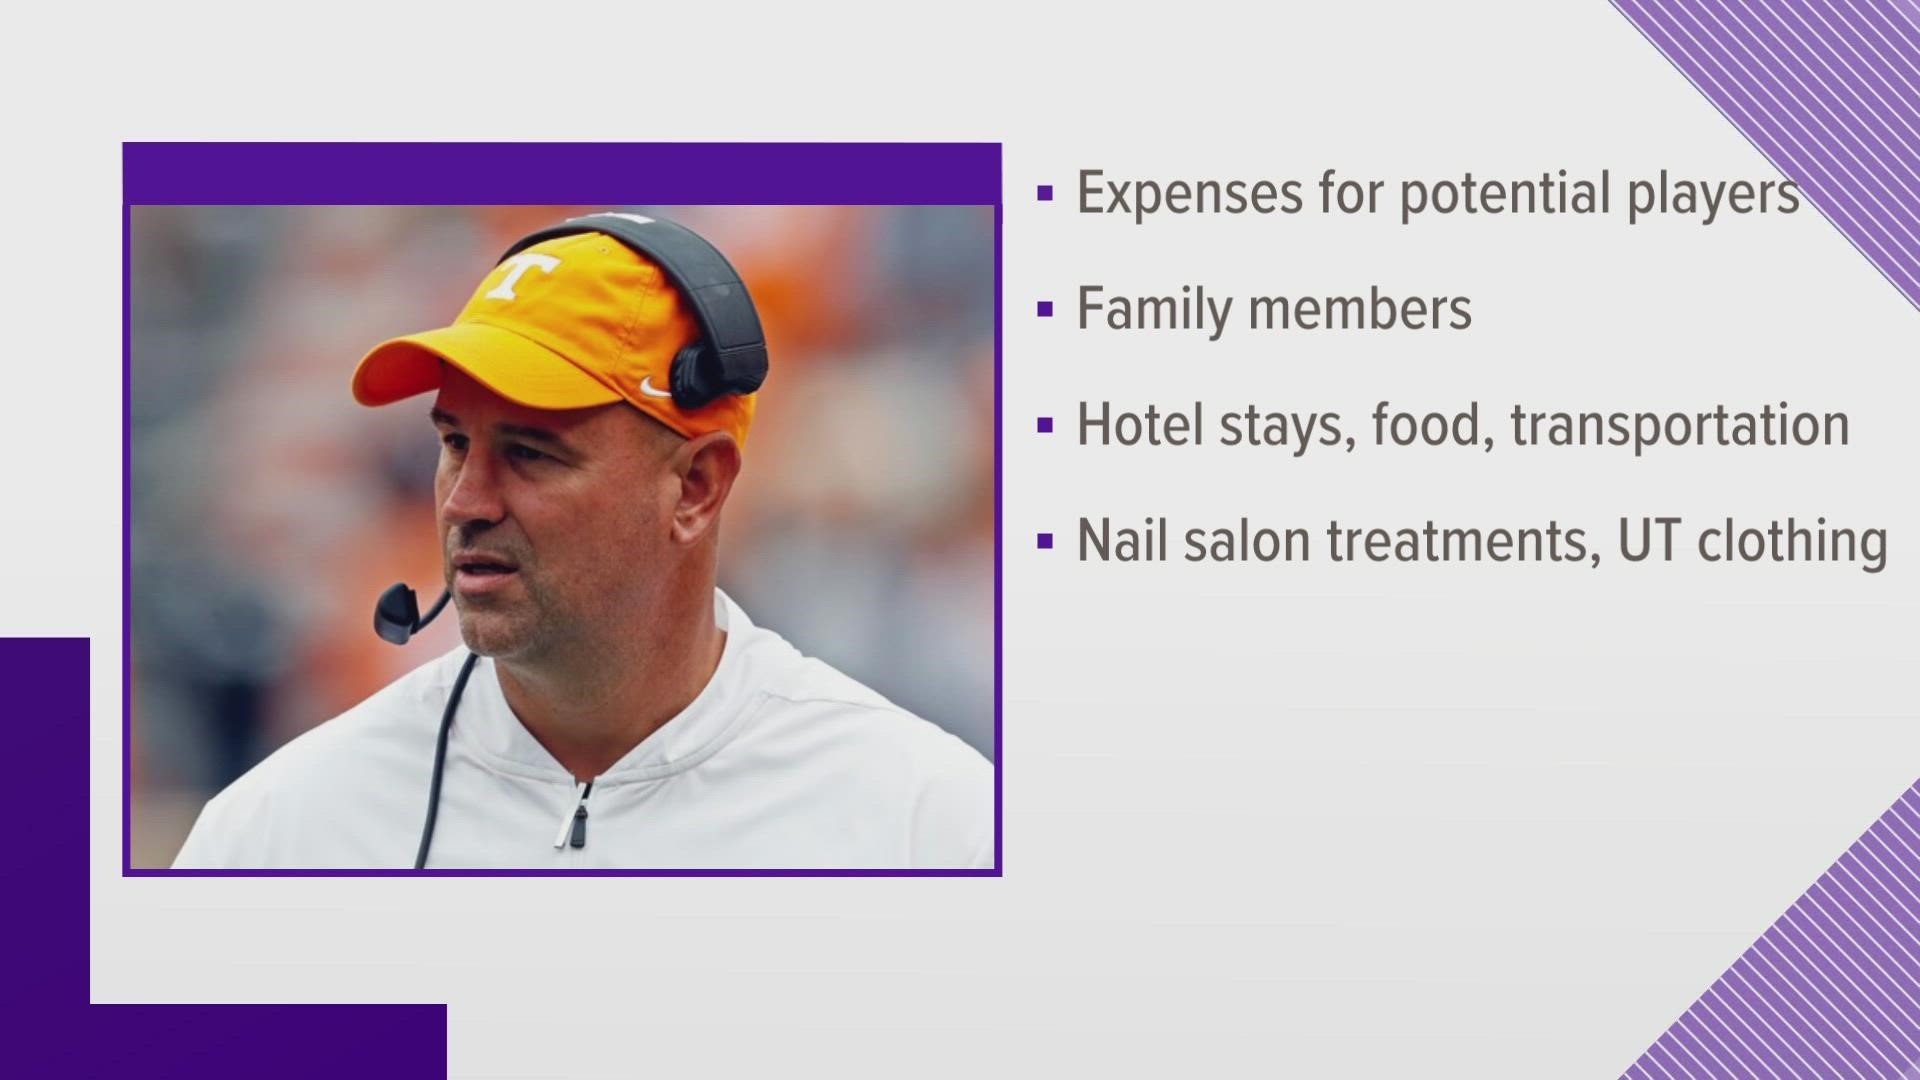 The notice of allegations from the NCAA sparked a swift reaction from UT leadership. Each institution is targeting former head football coach Jeremy Pruitt.